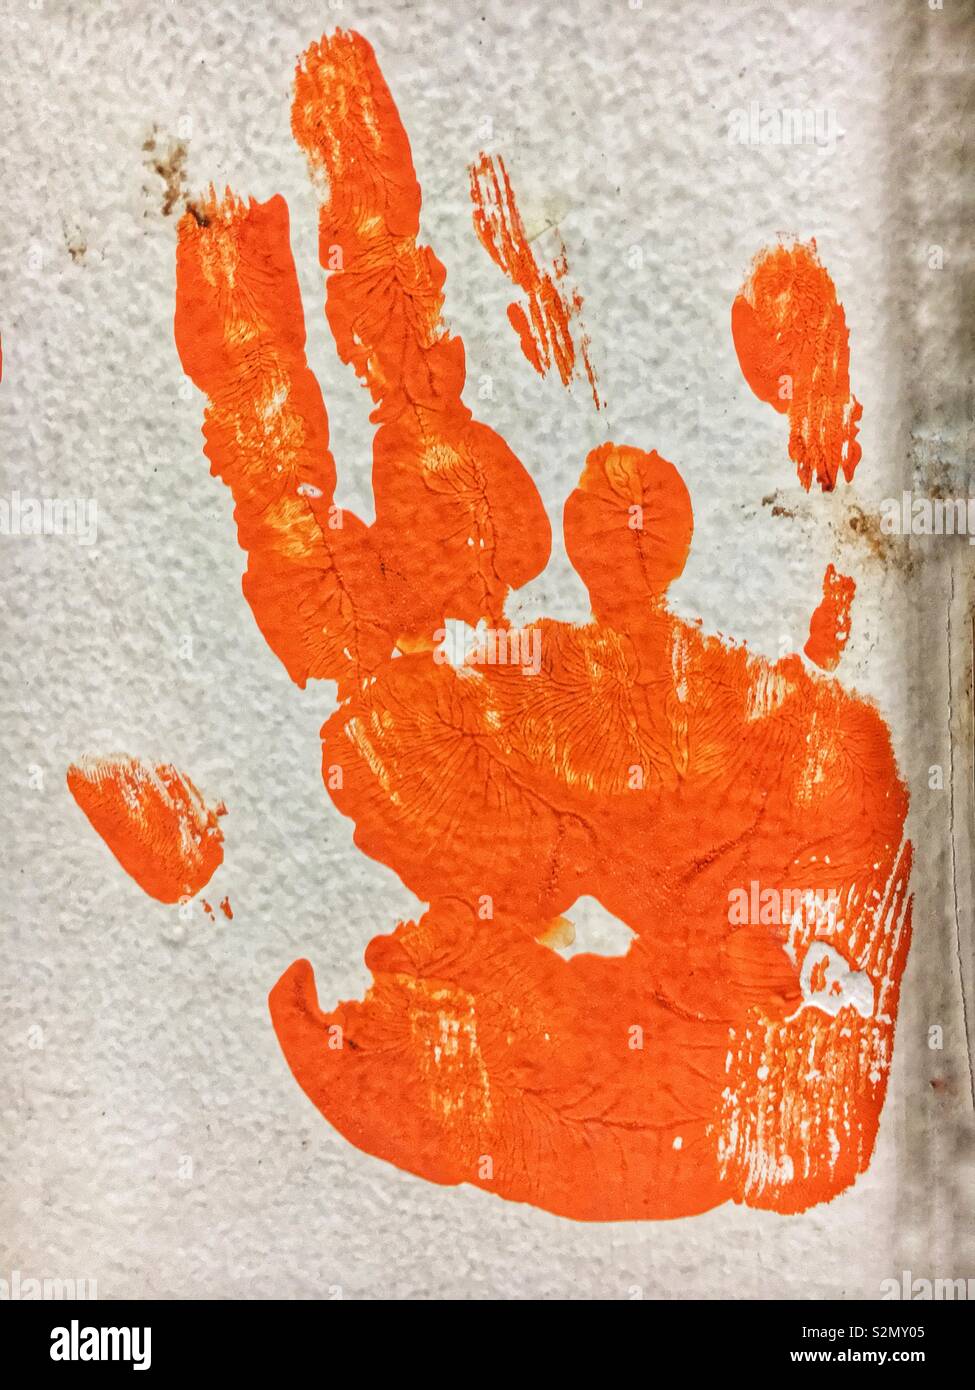 Child’s right hand print in orange paint using hand painting techniques. Stock Photo